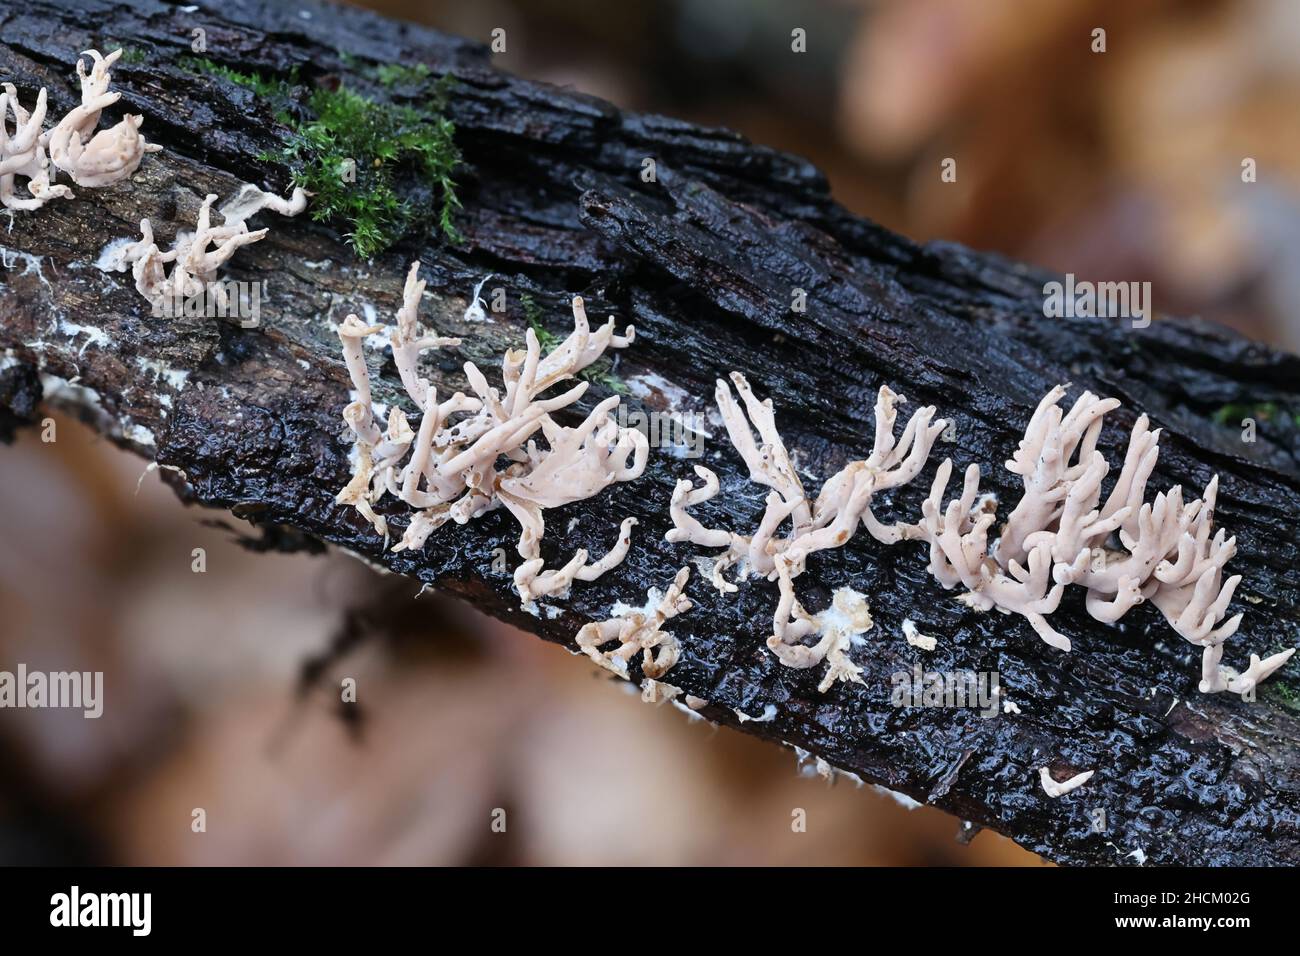 Lentaria byssiseda, a coral fungus from Finland growing on oak trunk, no common English name Stock Photo